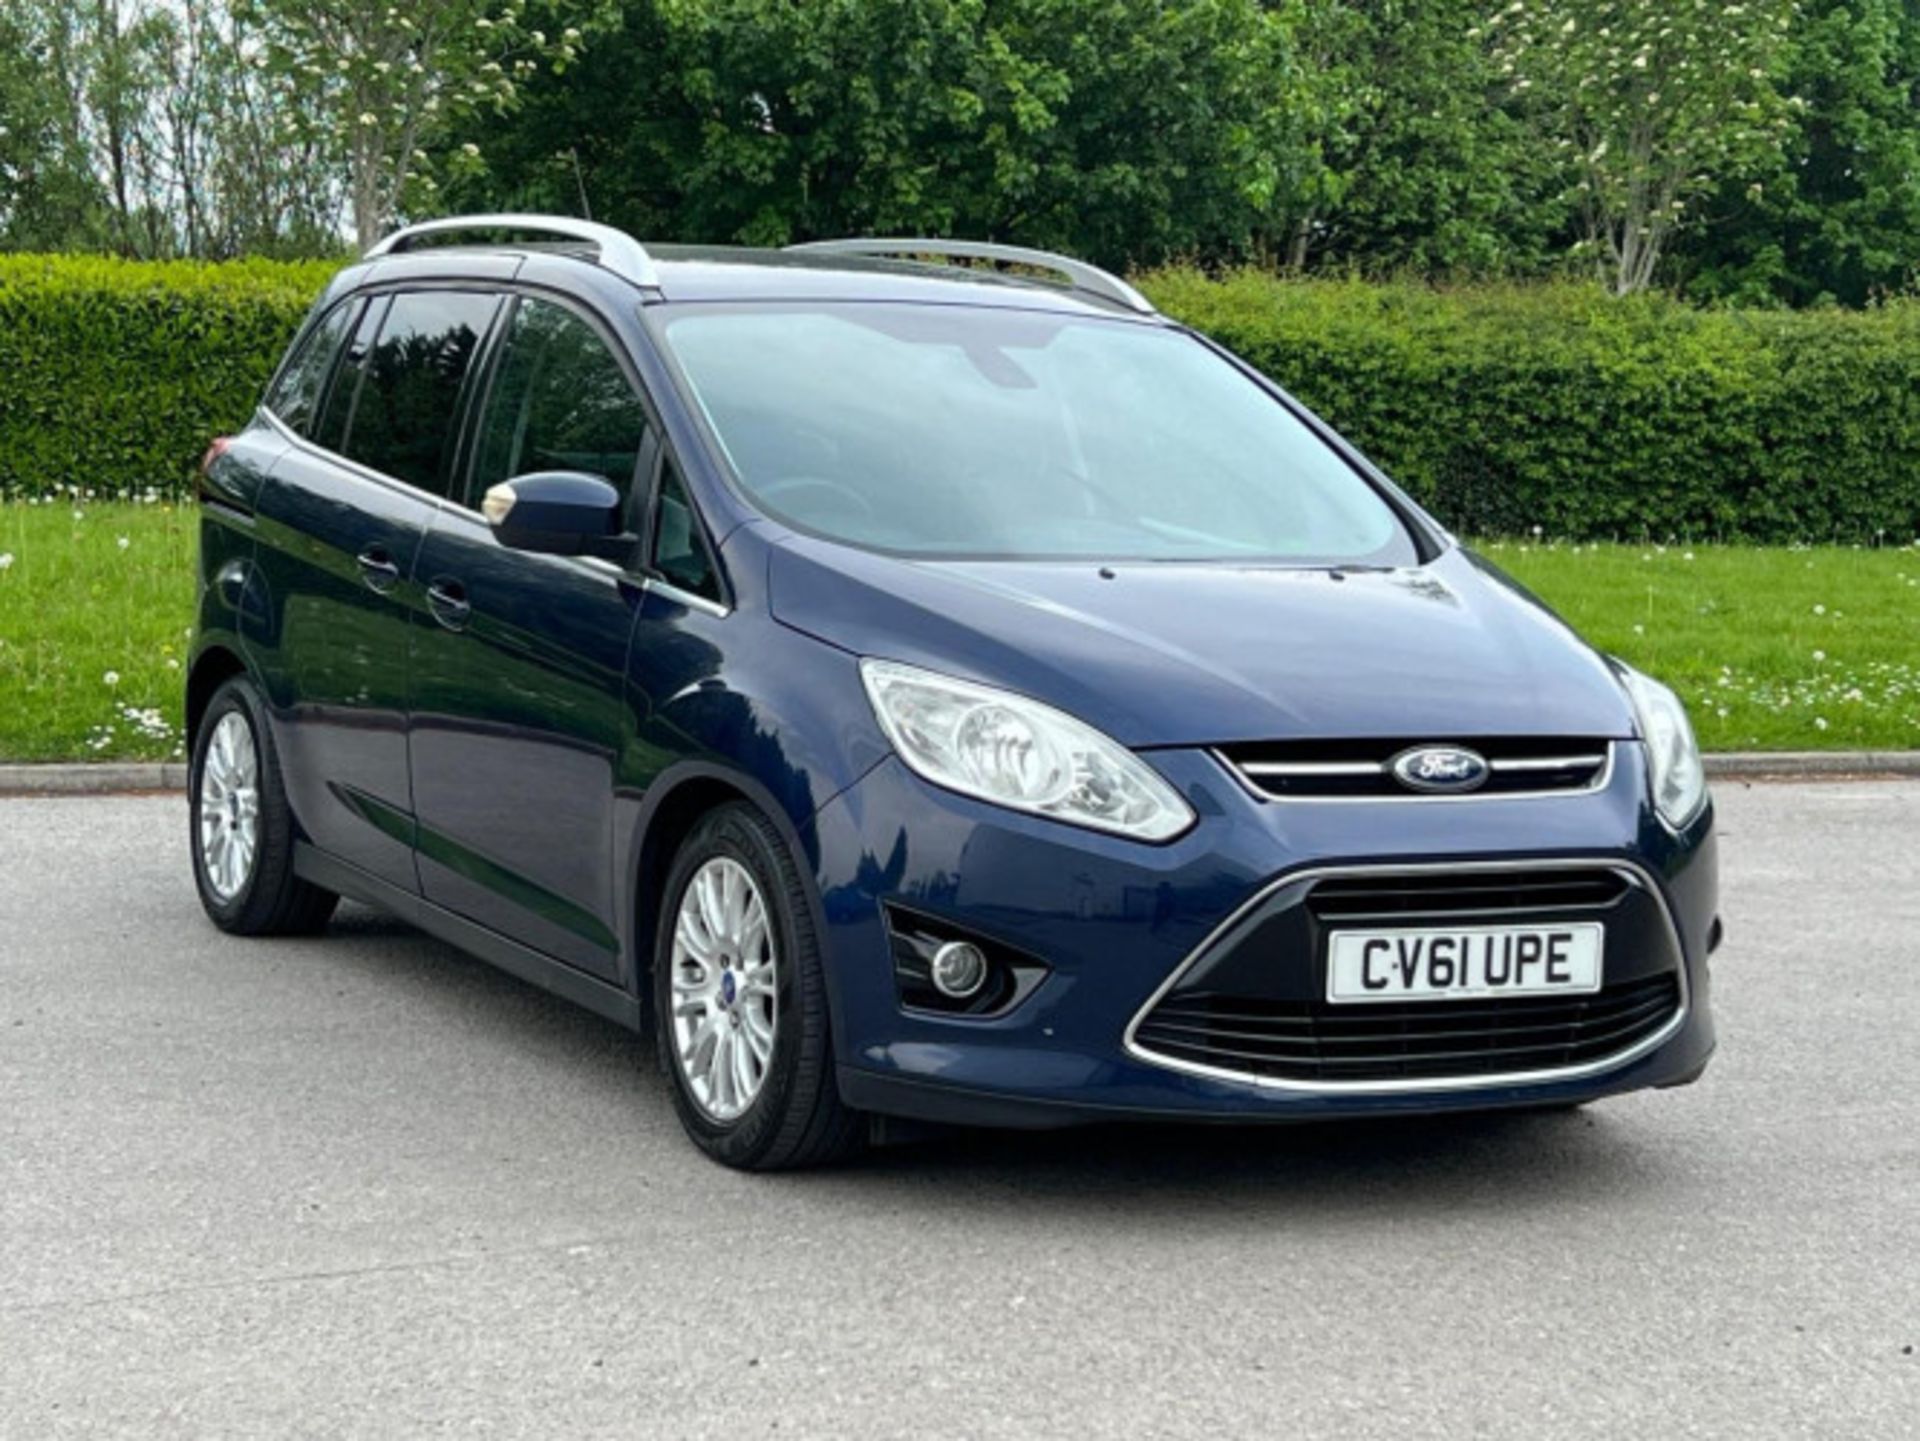 STYLISH AND SPACIOUS 2011 FORD GRAND C-MAX 1.6 TDCI >>--NO VAT ON HAMMER--<<